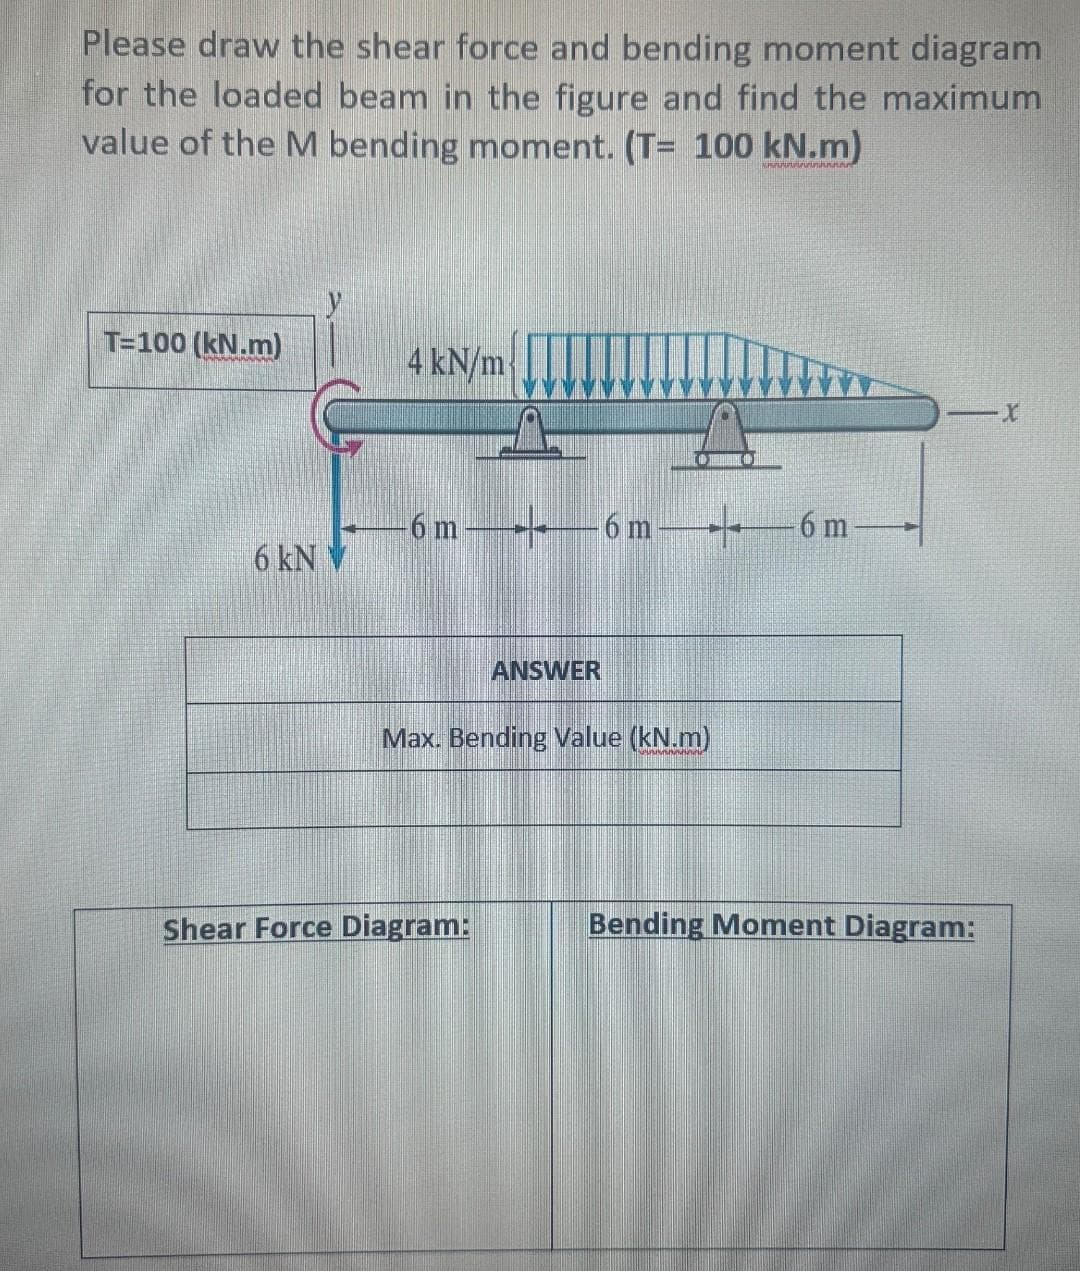 Please draw the shear force and bending moment diagram
for the loaded beam in the figure and find the maximum
value of the M bending moment. (T= 100 kN.m)
T=100 (kN.m)
6 kN
4 kN/m
6m6m
ANSWER
Max. Bending Value (kN.m)
Shear Force Diagram:
6 m
Bending Moment Diagram:
X